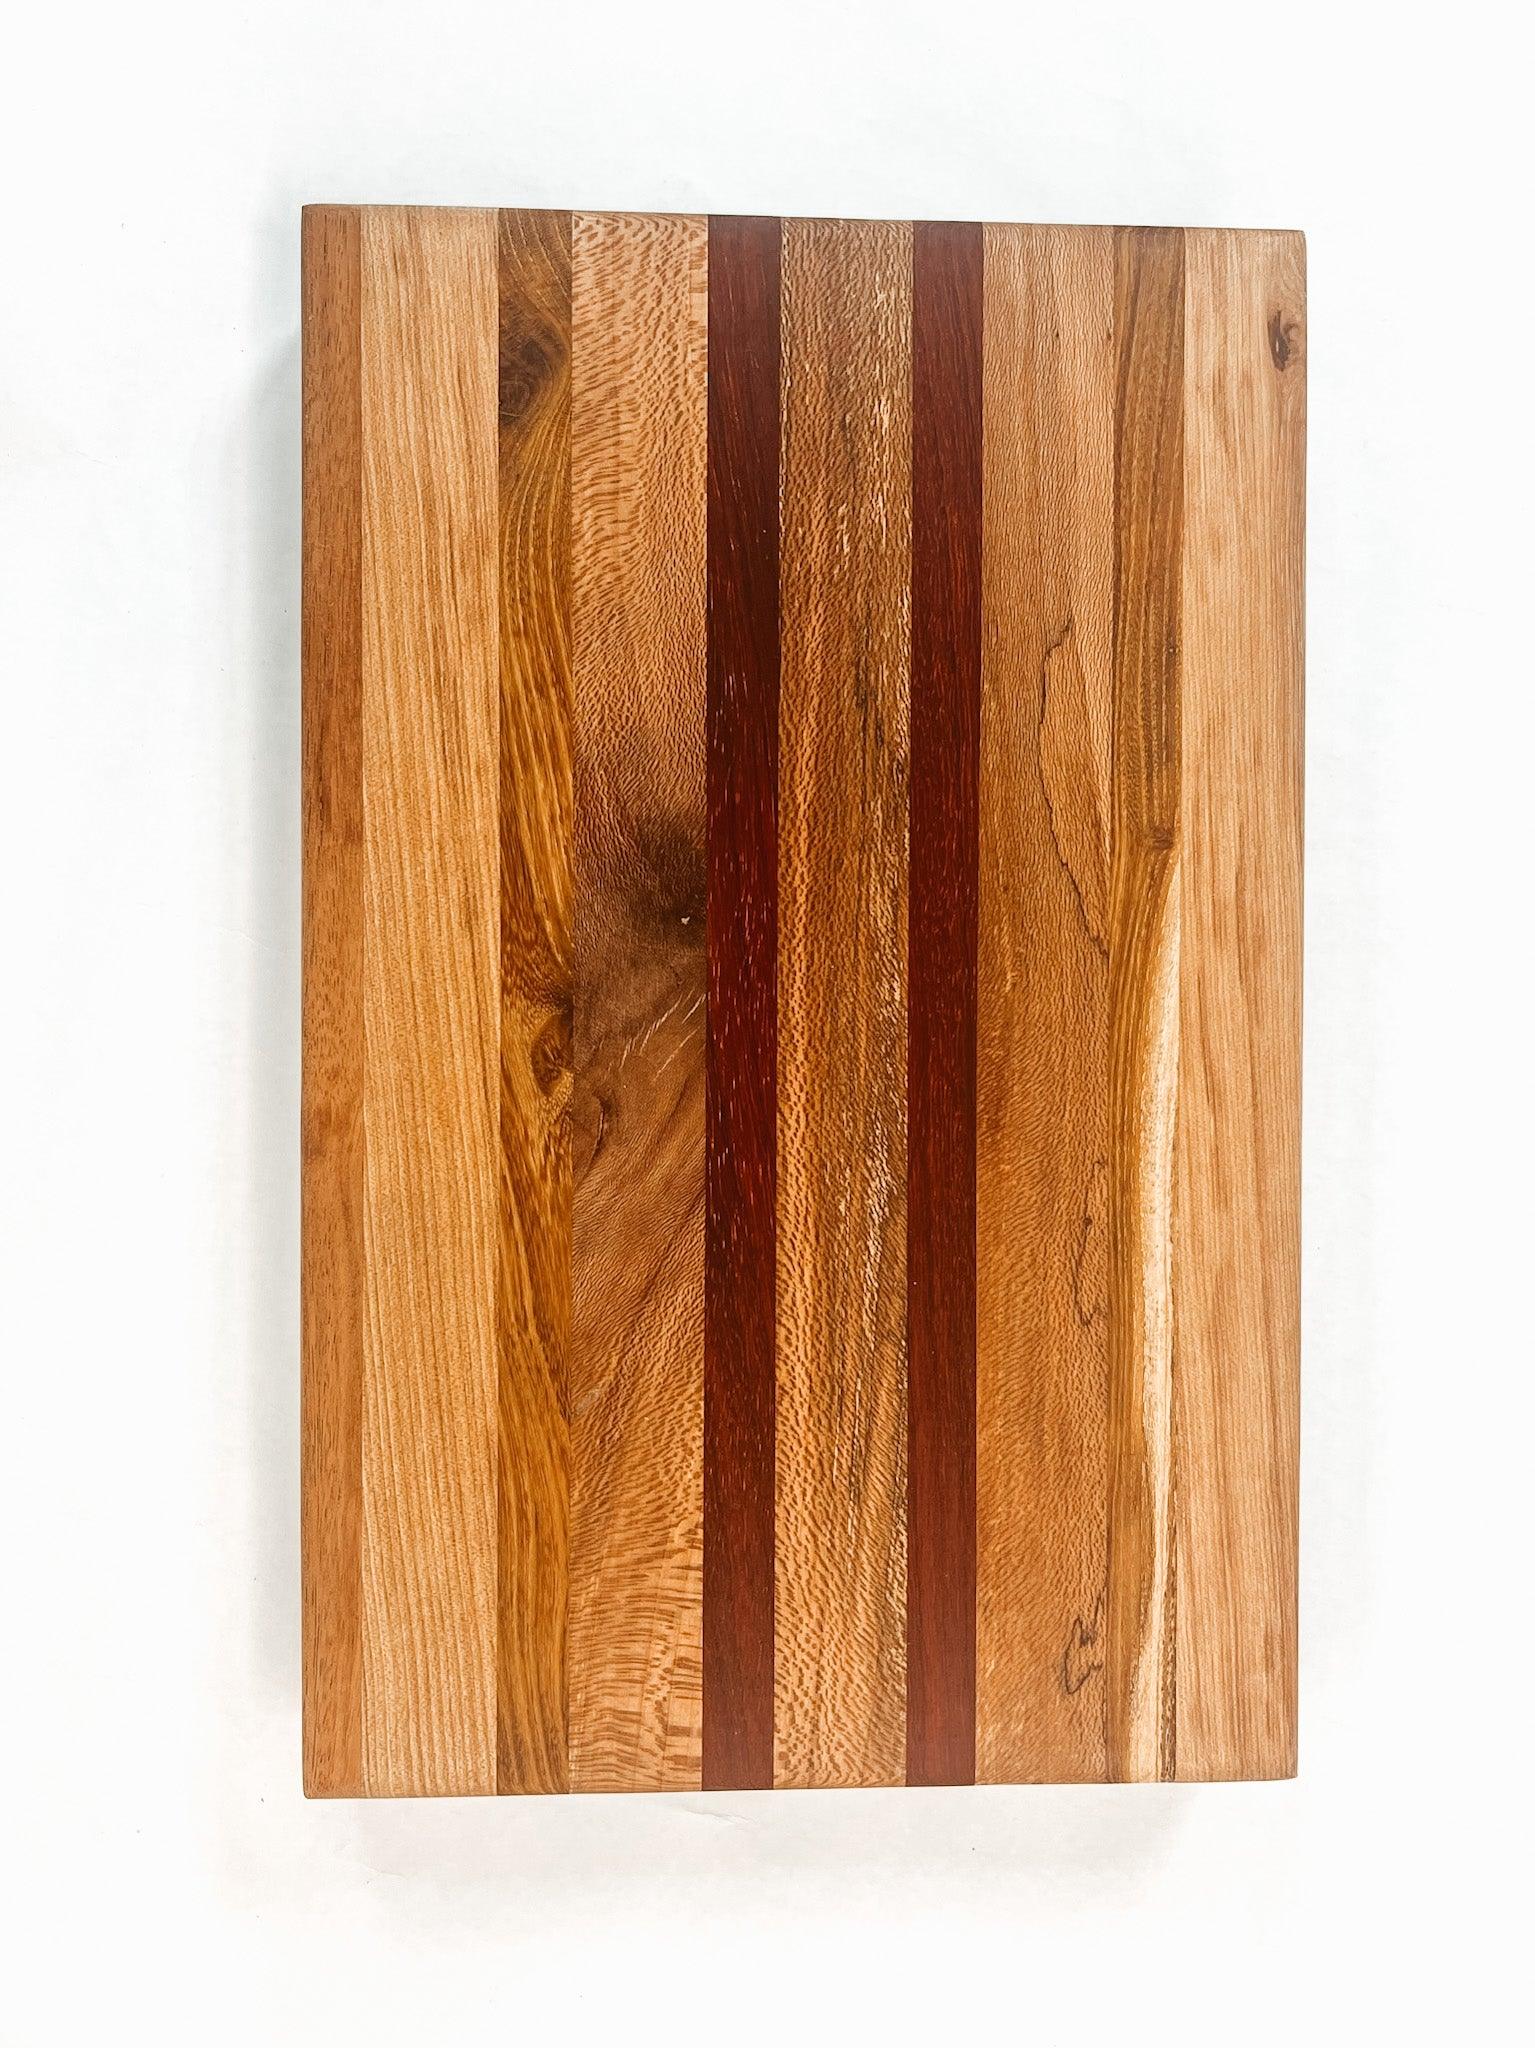 The Medley Cutting Board Collection